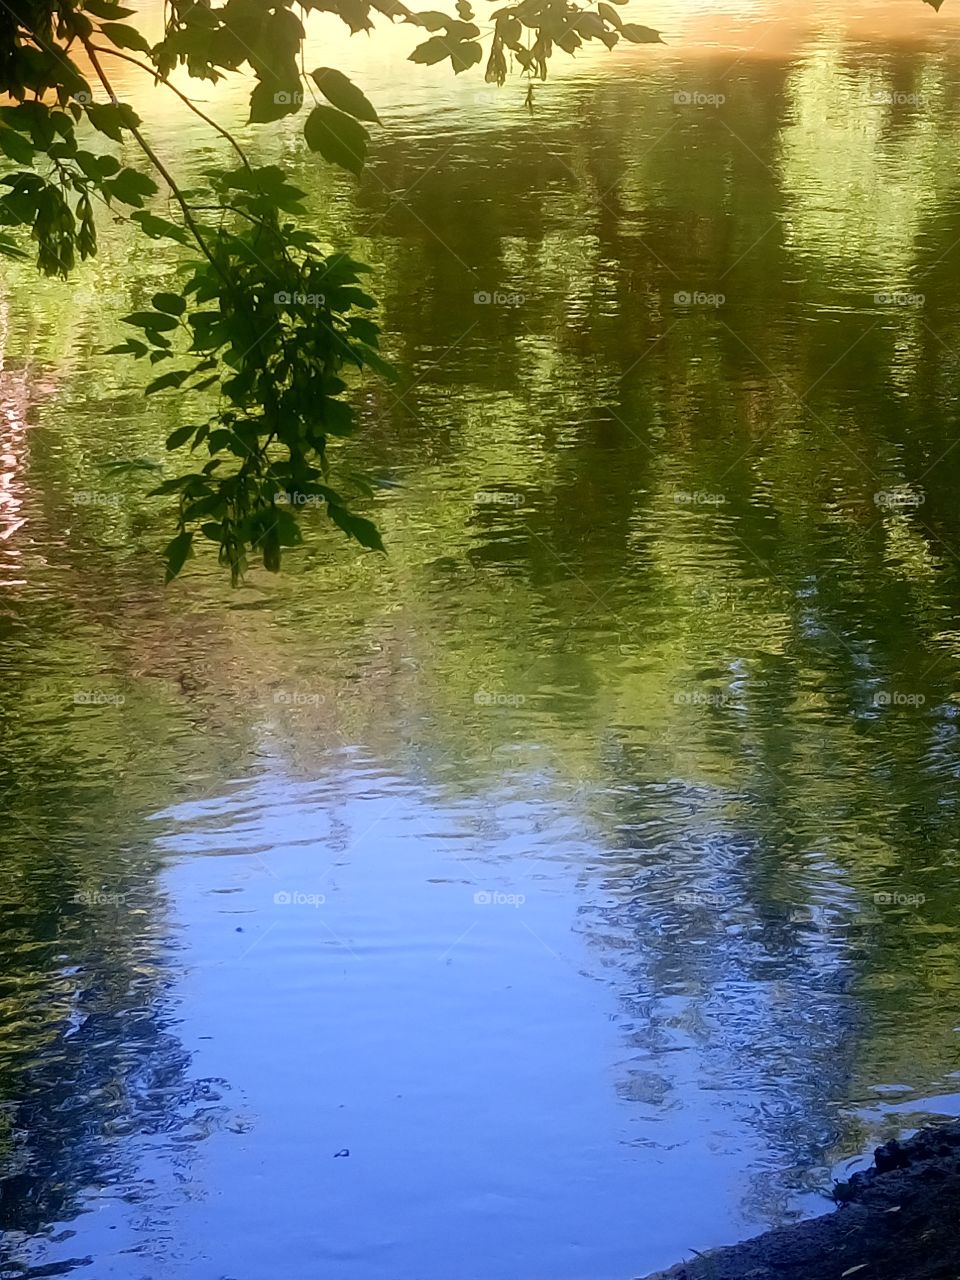 polish nature,  reflections in a small river,  in my neighborhood